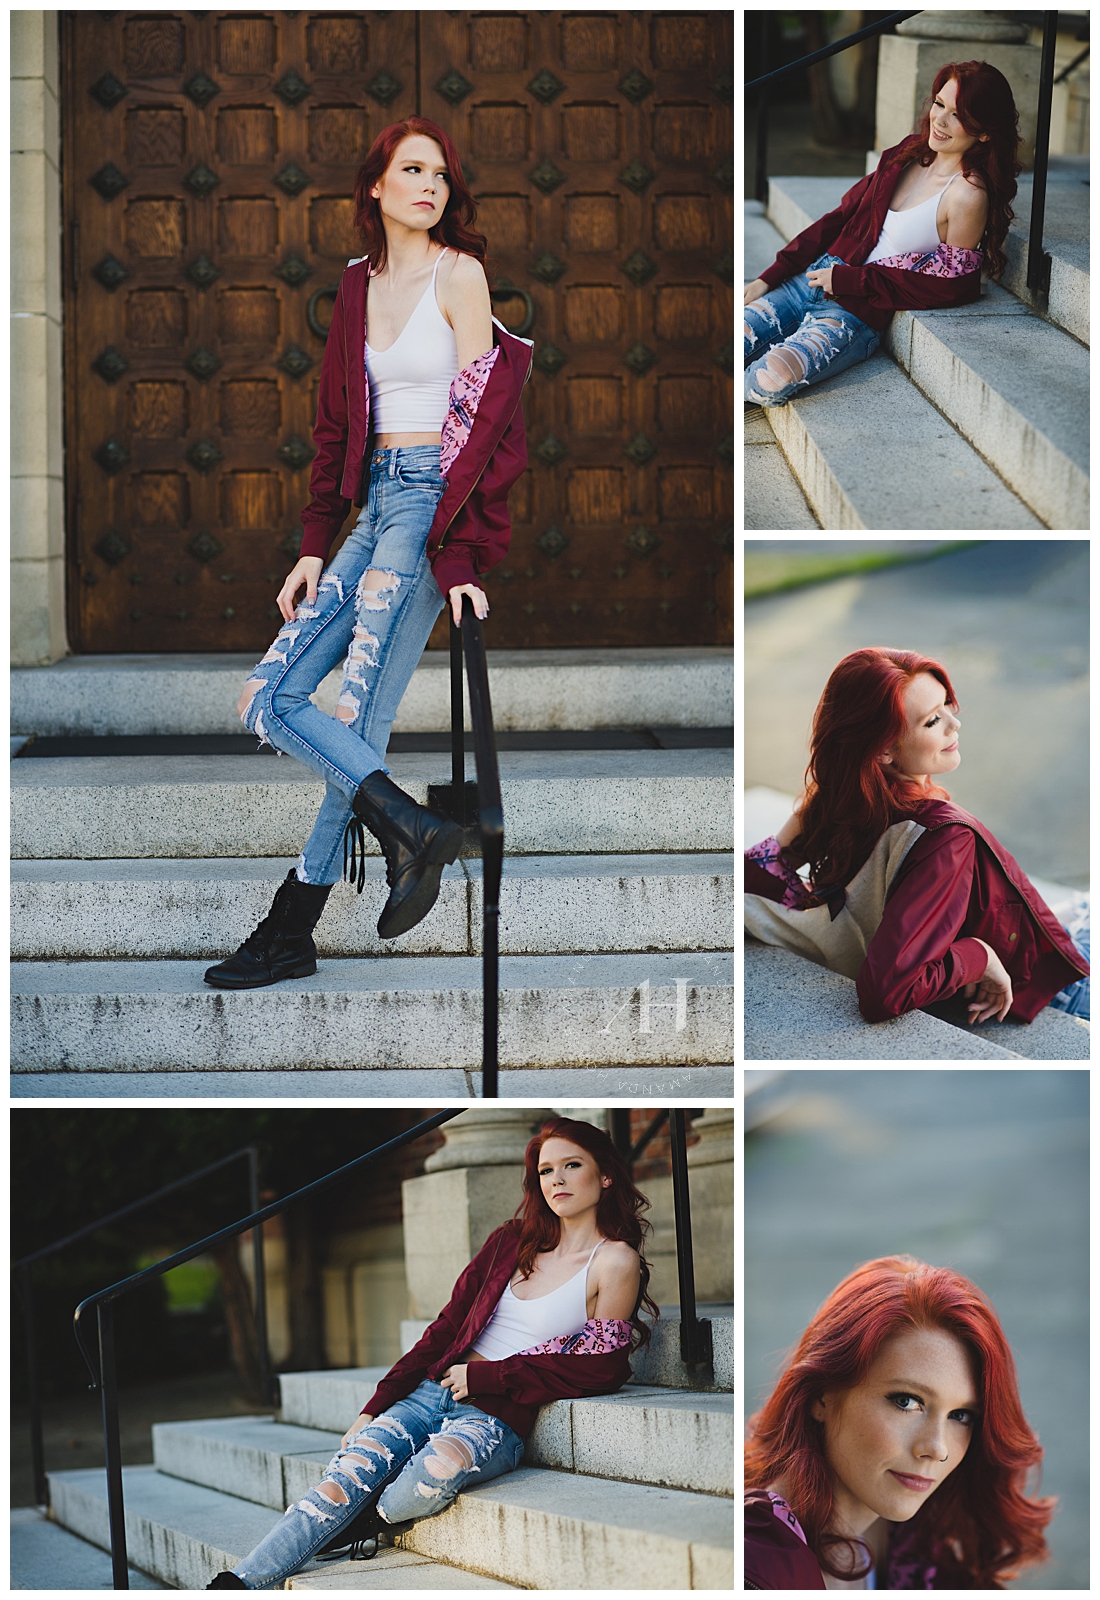 Stadium High School Senior Portraits | How to Style Distressed Jeans, Outfit Inspiration for Edgy Senior Portraits | Photographed by Tacoma's Best Senior Portrait Photographer Amanda Howse